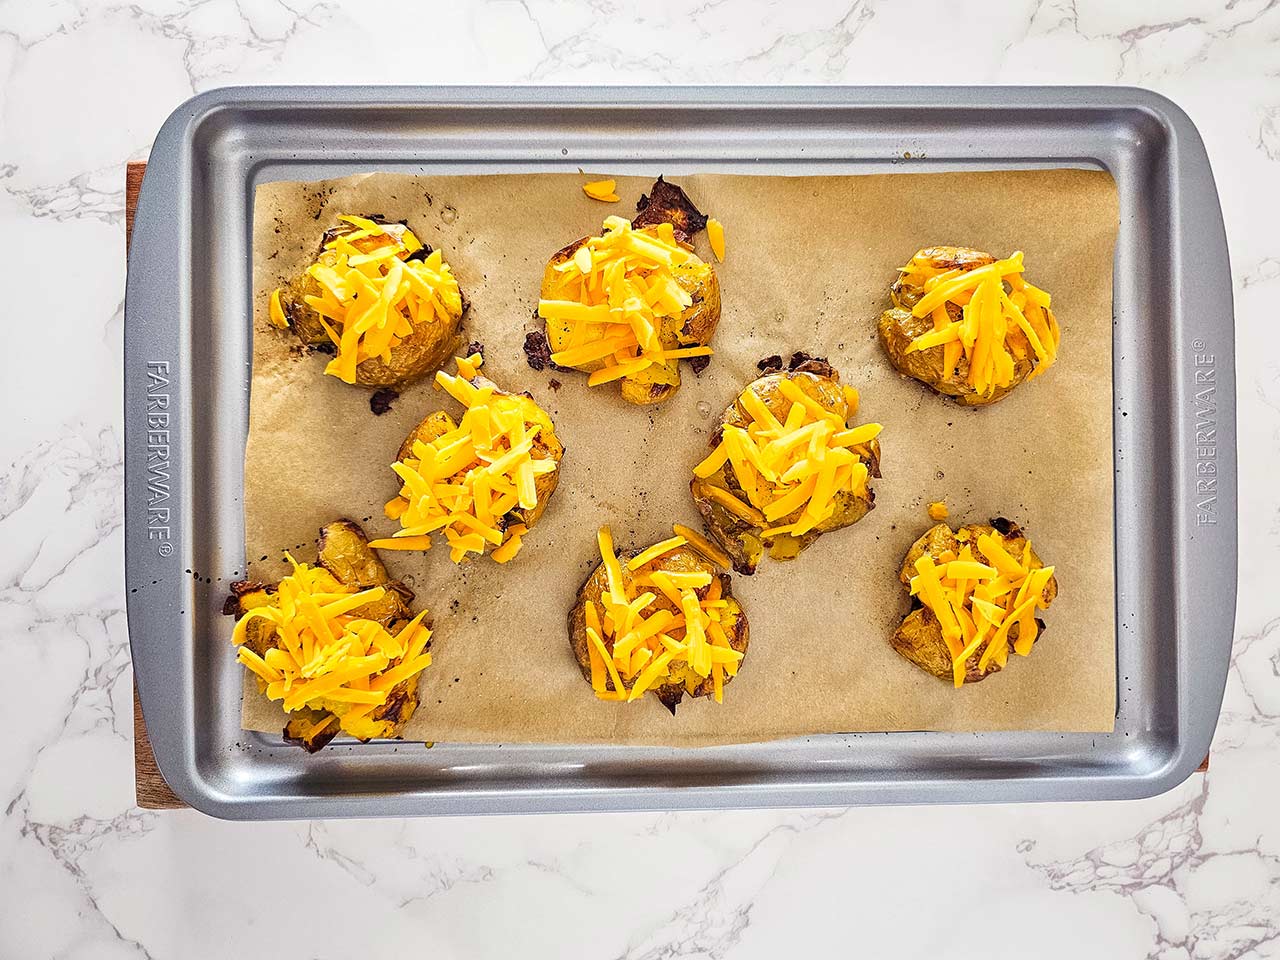 Smashed potatoes on a sheet pan sprinkled with grated cheese.